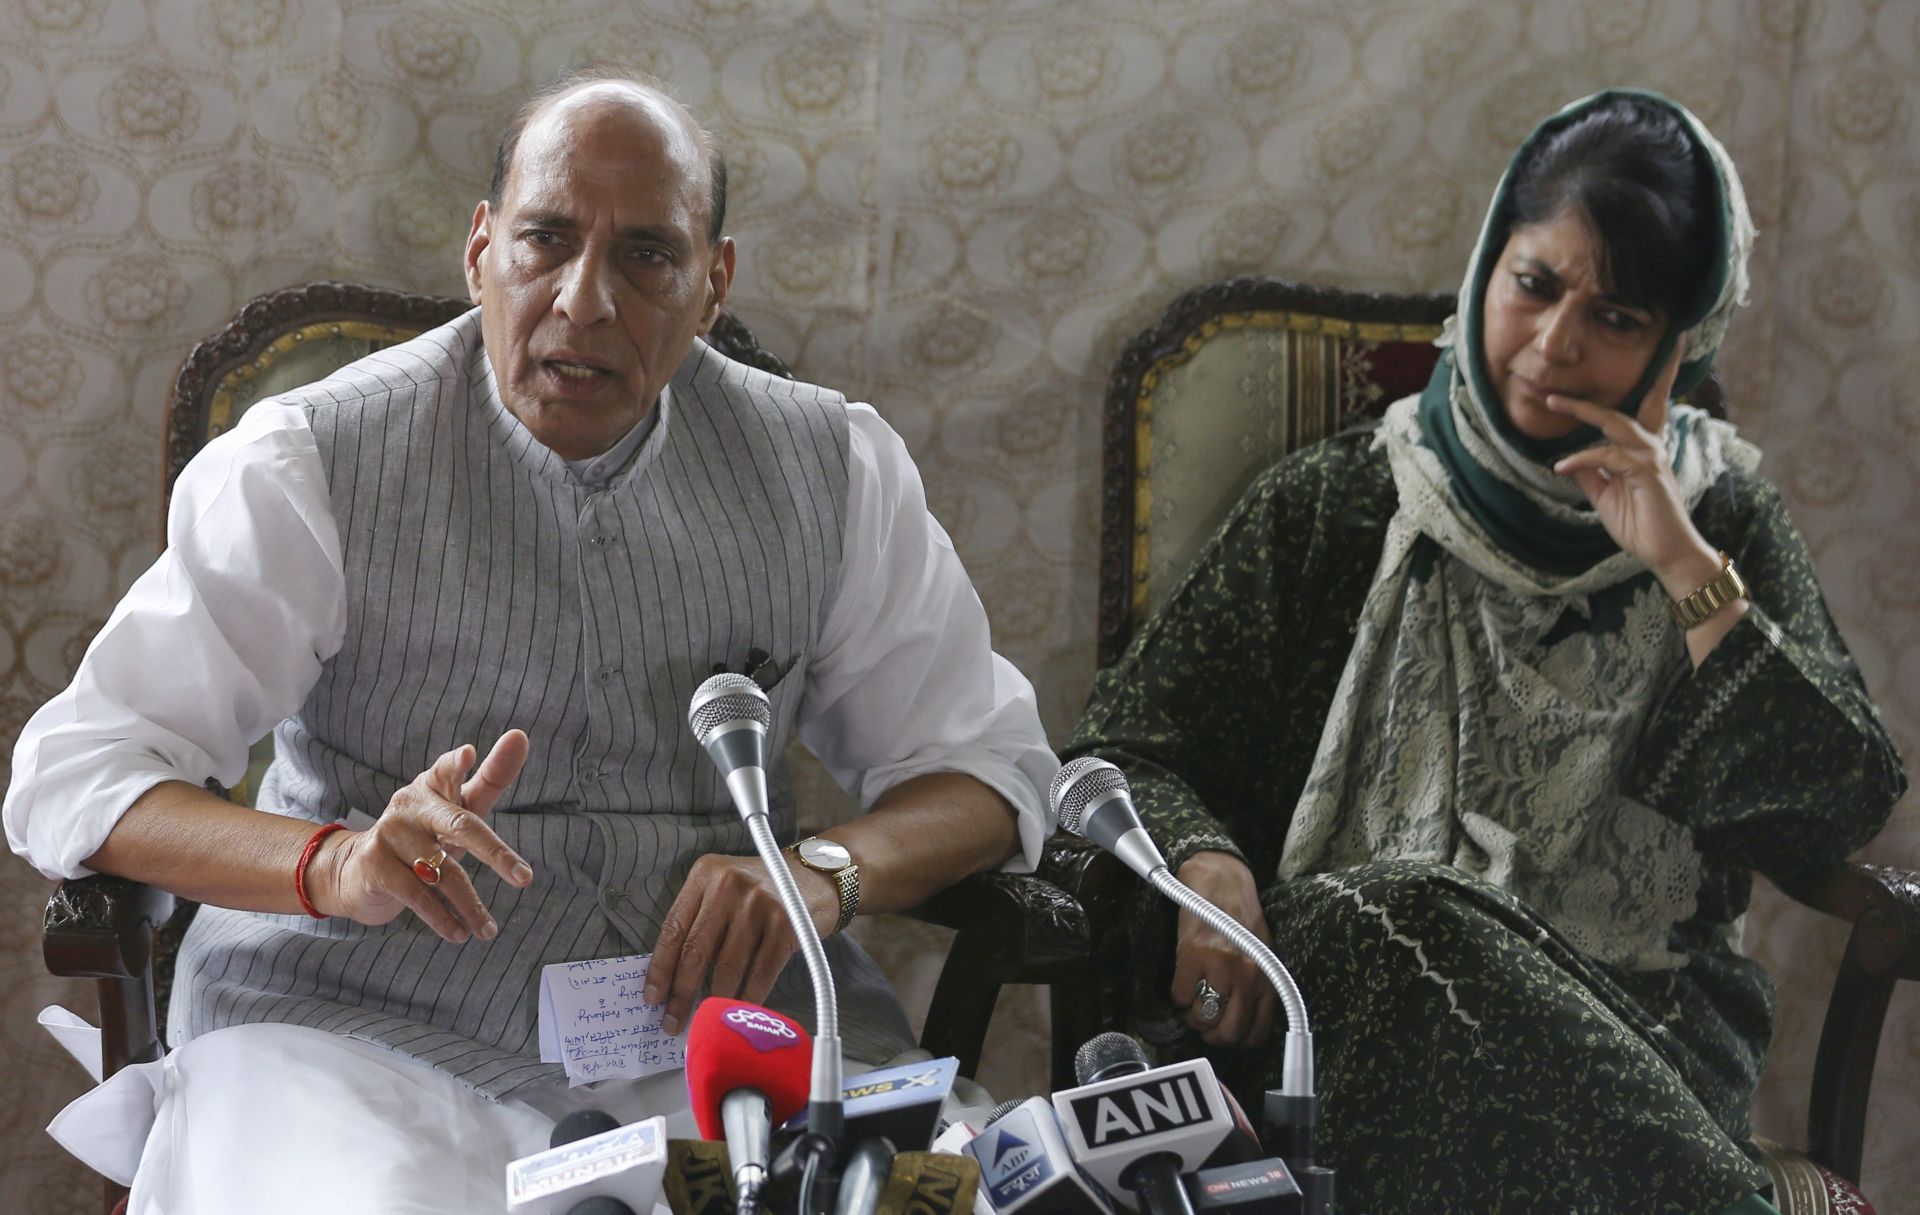 epa05509396 Indian Home Minister Rajnath Singh addressing a joint press conference with Indian Kashmir Chief Minister Mehbooba Mufti at her Fair View residence in Srinagar, the summer capital of Indian Kashmir, India, 25 August 2016. Singh, who visited Indian Kashmir for the second time in a month, appealed to people of Kashmir to help restore peace in the valley saying that an expert committee of Government of India would within few days give an alternative to the pellet gun for crowd control measures in the restive region. Over 65 people have been killed and more than 7,000 were injured, some of them blinded by pellets, during the past one-and-a-half month summer unrest across Indian Kashmir following the killing of Hizb-ul-Mujahideen commander, Burhan Muzaffar Wani and his two associates in a gunfight on 08 July 2016.  EPA/FAROOQ KHAN